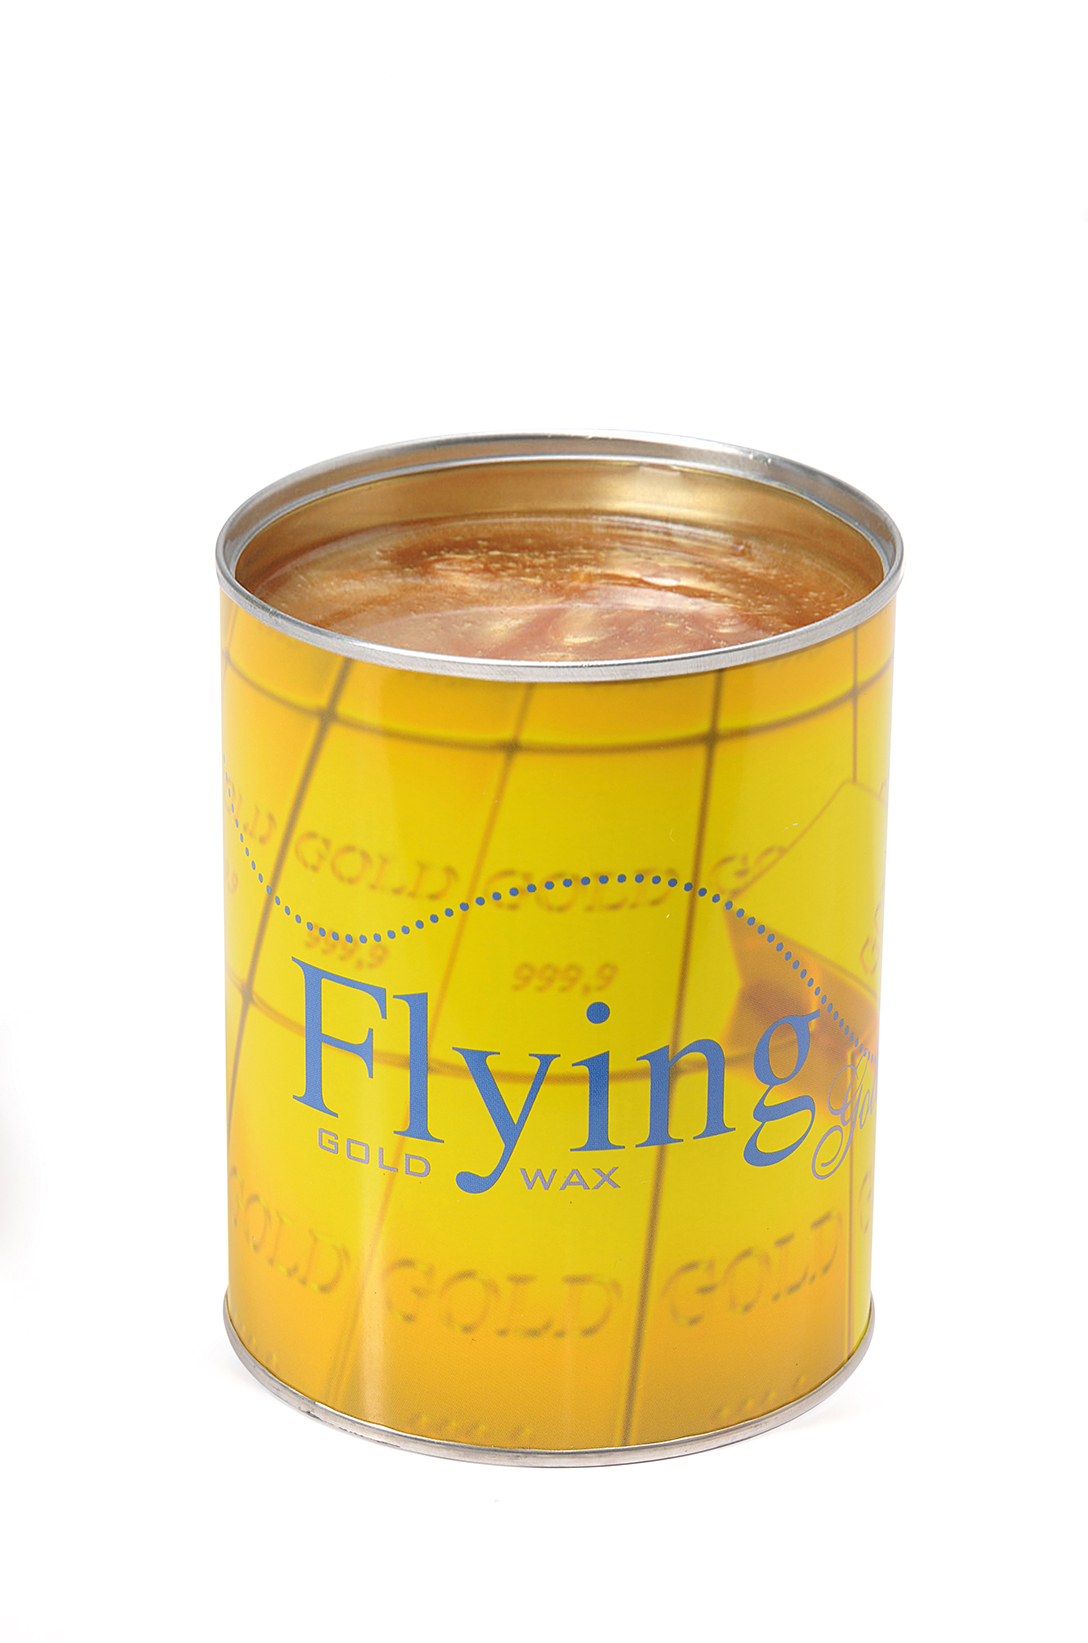 24K800 - FLYING gold wax, 800 ml can